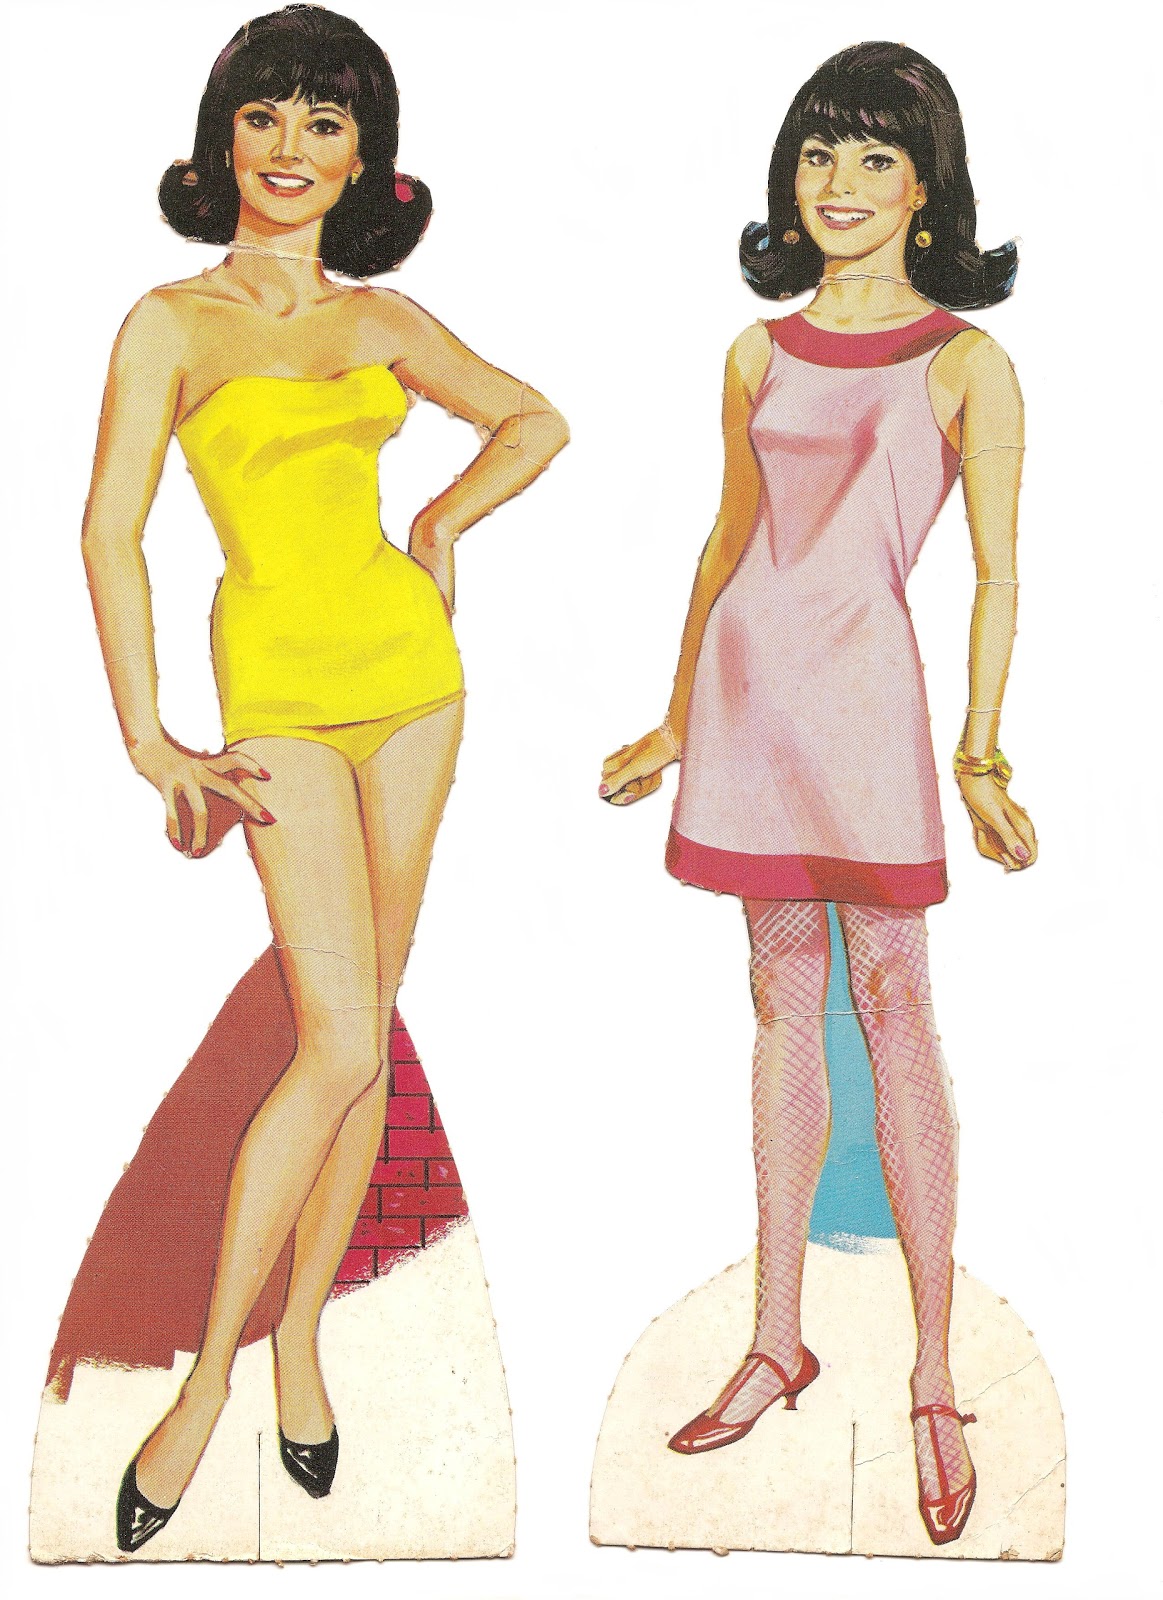 Mostly Paper Dolls: Marlo Thomas as THAT GIRL